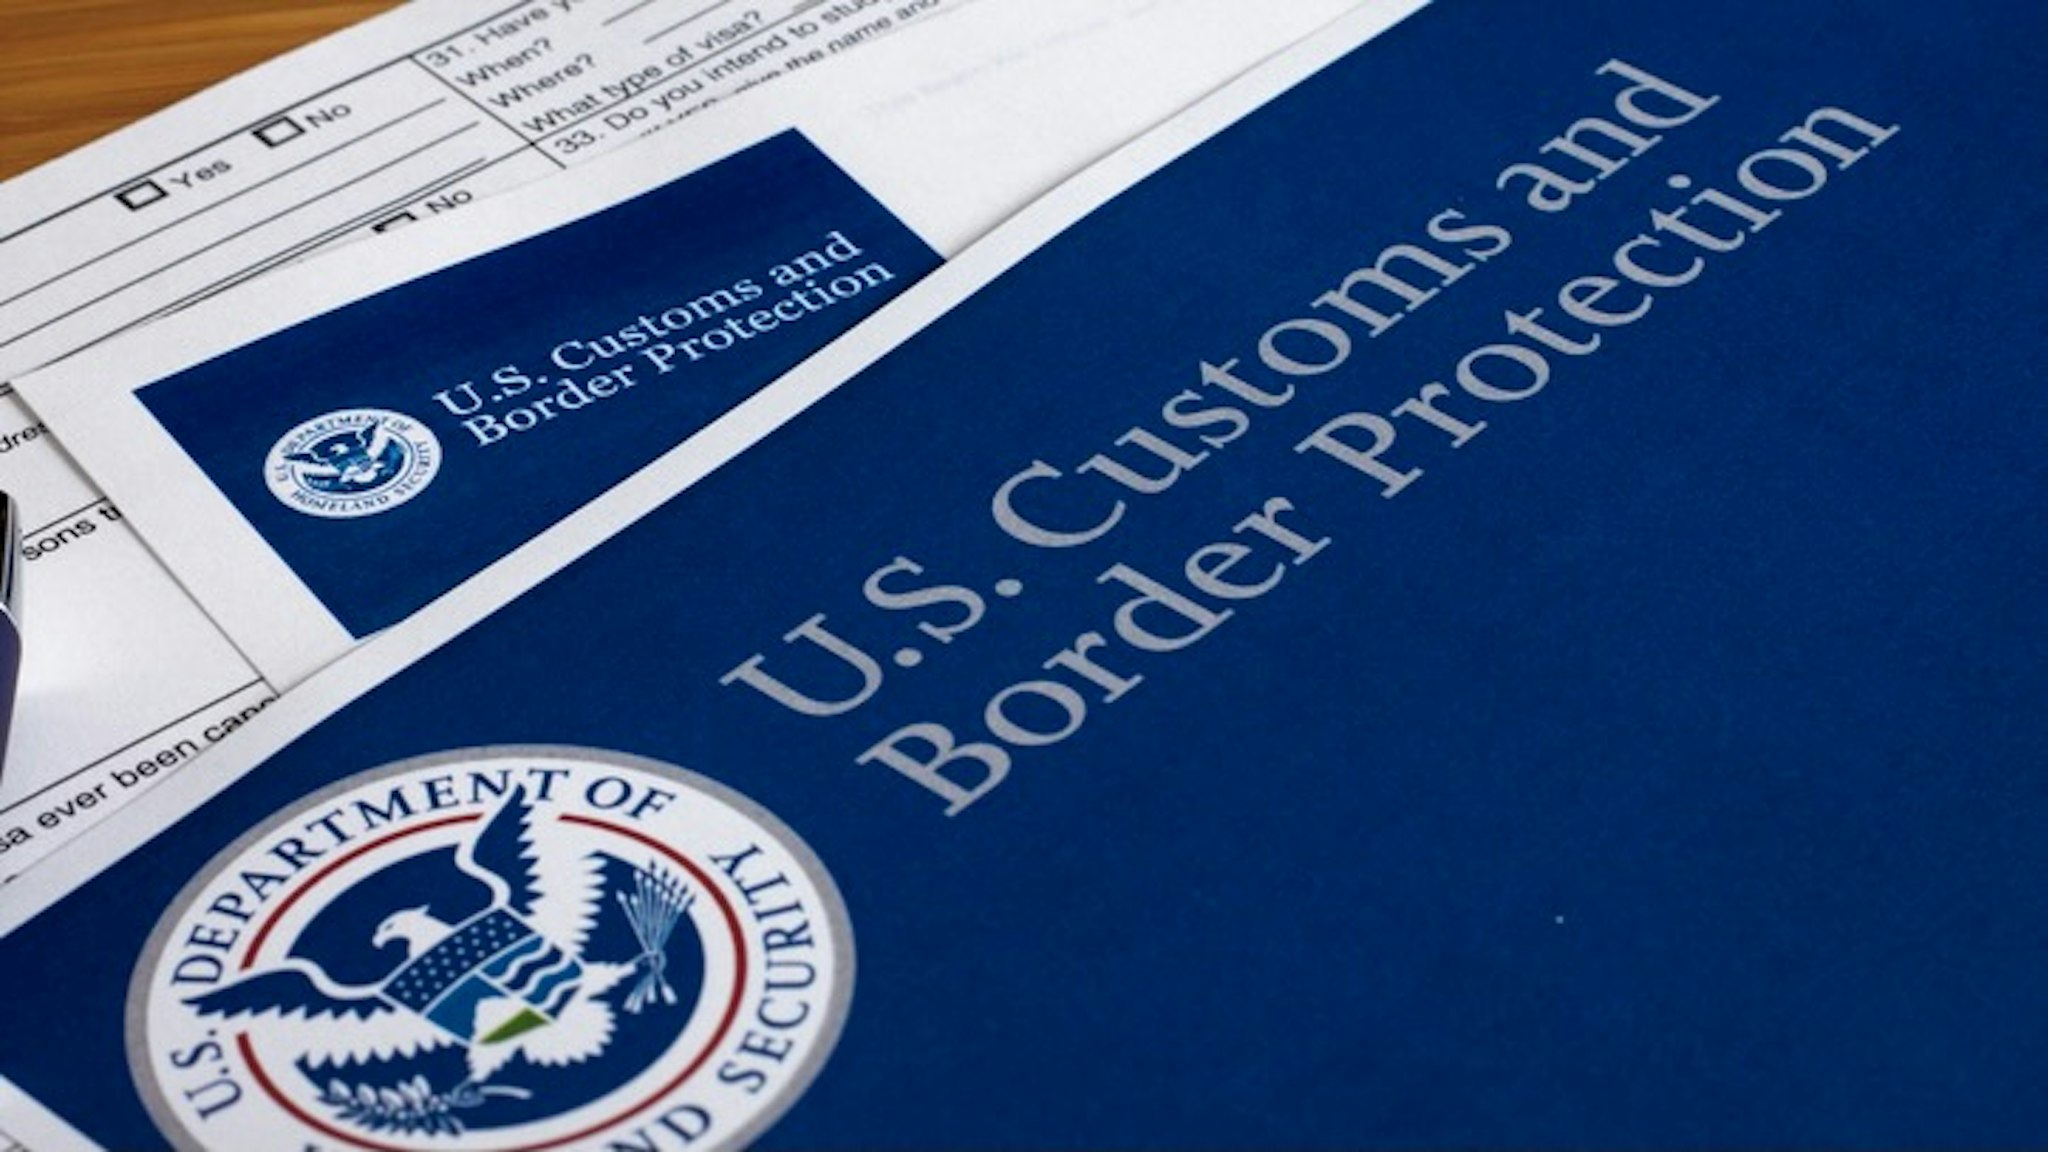 US Customs and Border Protection - stock photo US Customs and Border Protection form to fill out